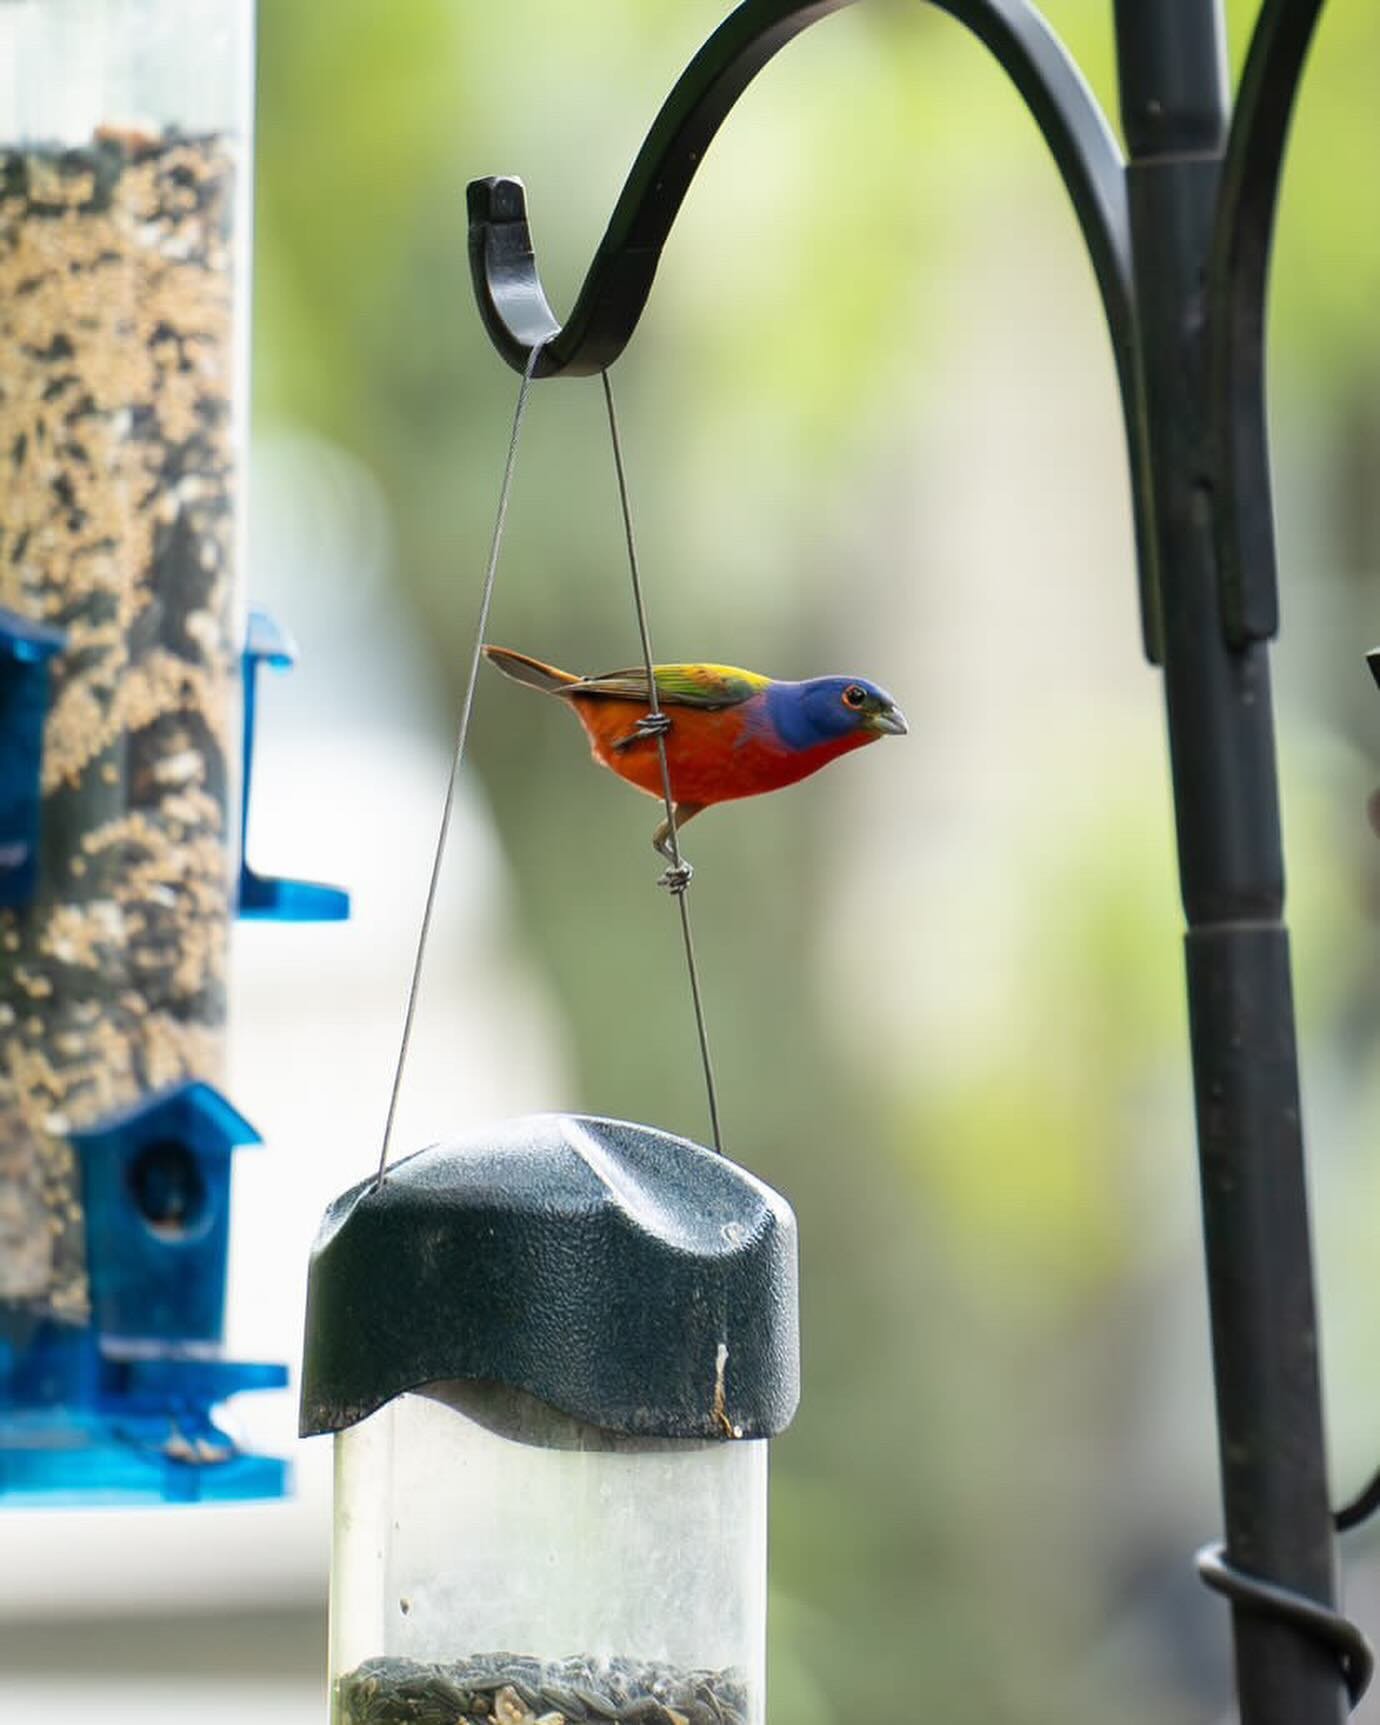 Thanks again to one of our favorite feeder watchers, @katievogel48 for sharing her gorgeous shots of this Painted Bunting! Have you had any exciting migrants at your feeders lately? Let us know!

📸 @katievogel48 
#paintedbunting #birdphotography #wi